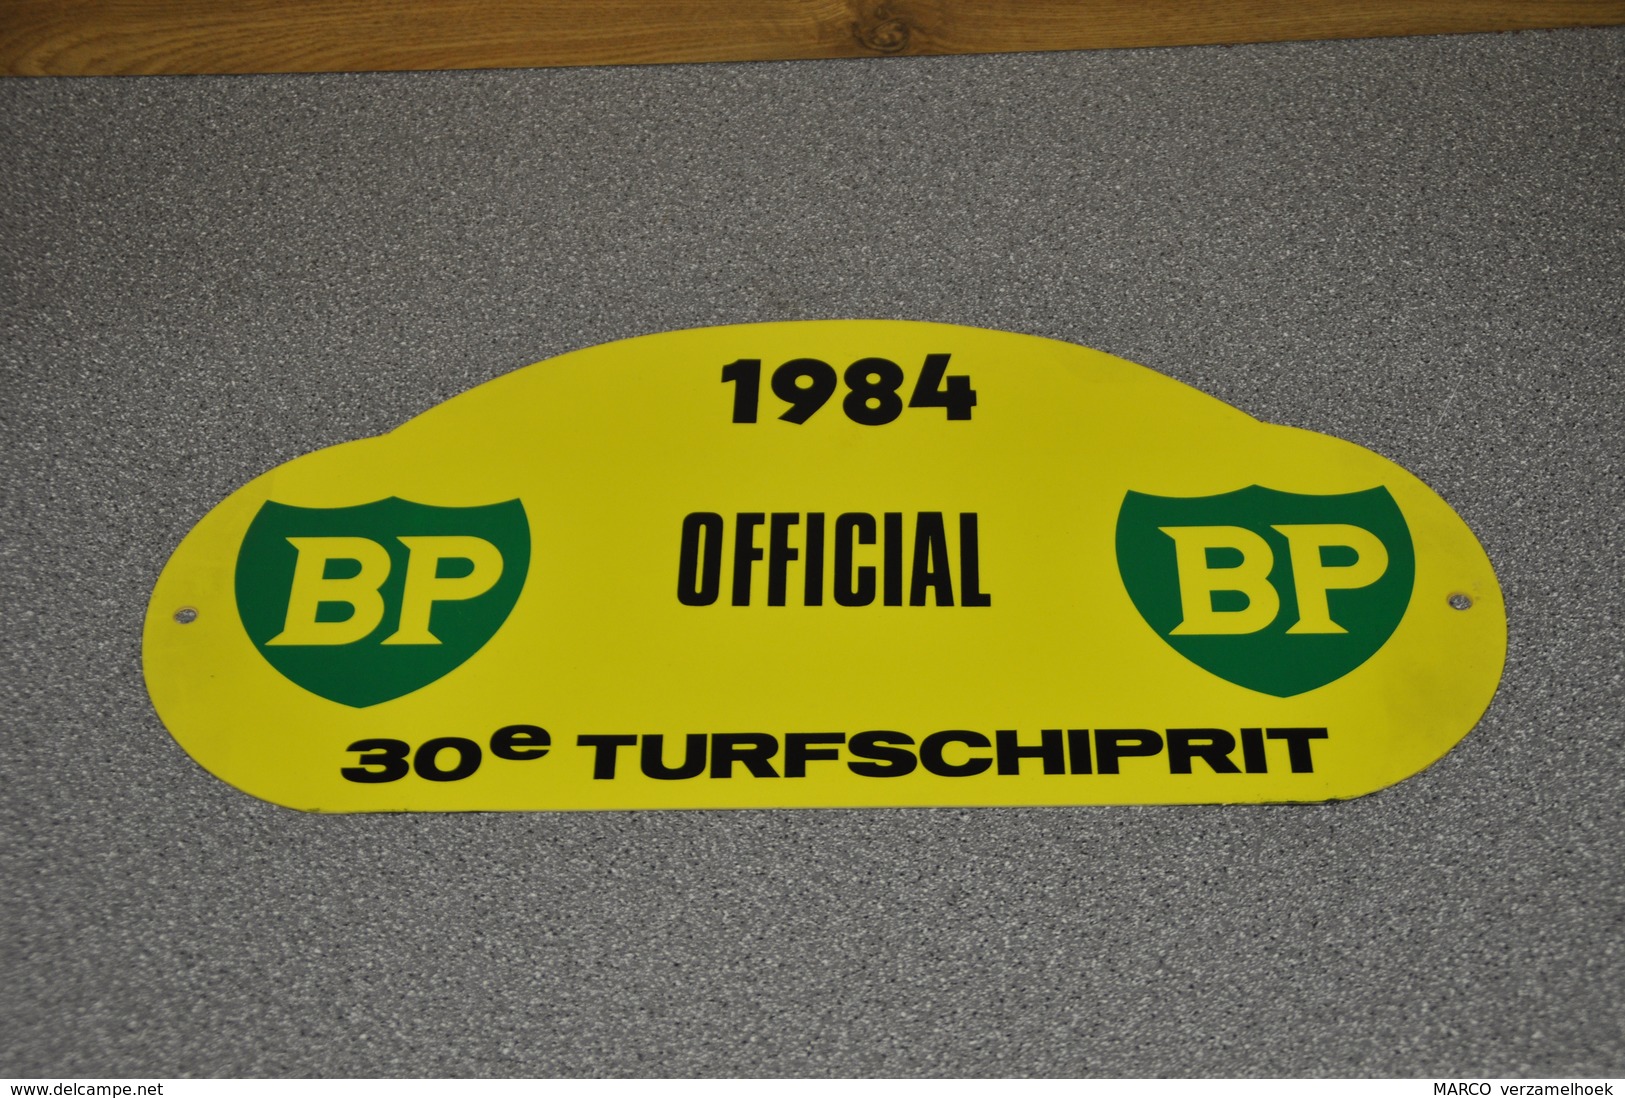 Rally Plaat-rallye Plaque Plastic: 30e Turfschiprit Breda 1984 OFFICIAL BP - Rally-affiches